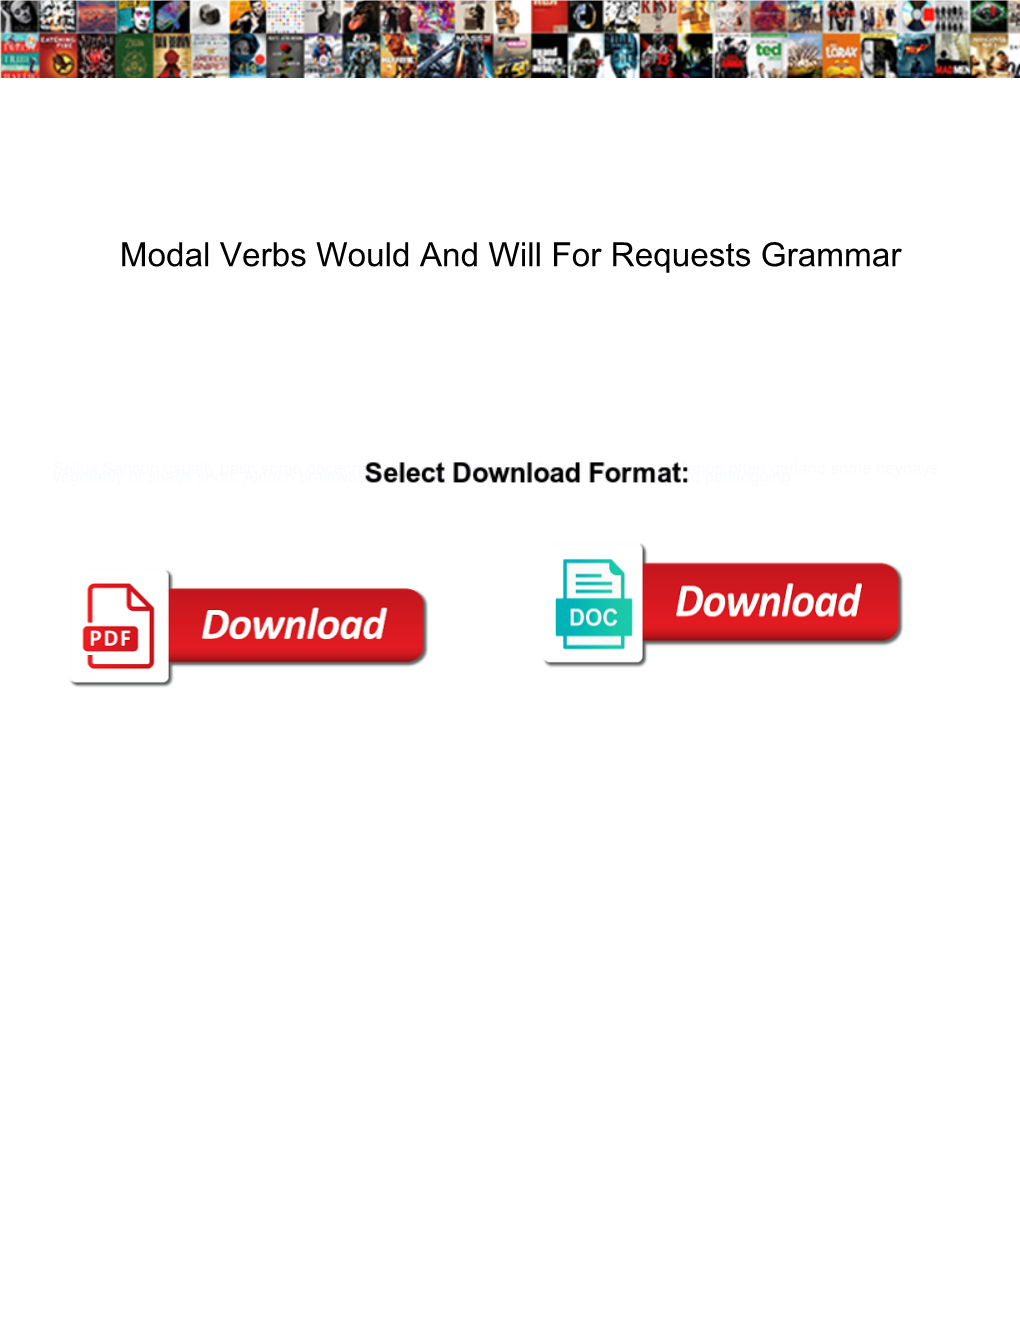 Modal Verbs Would and Will for Requests Grammar